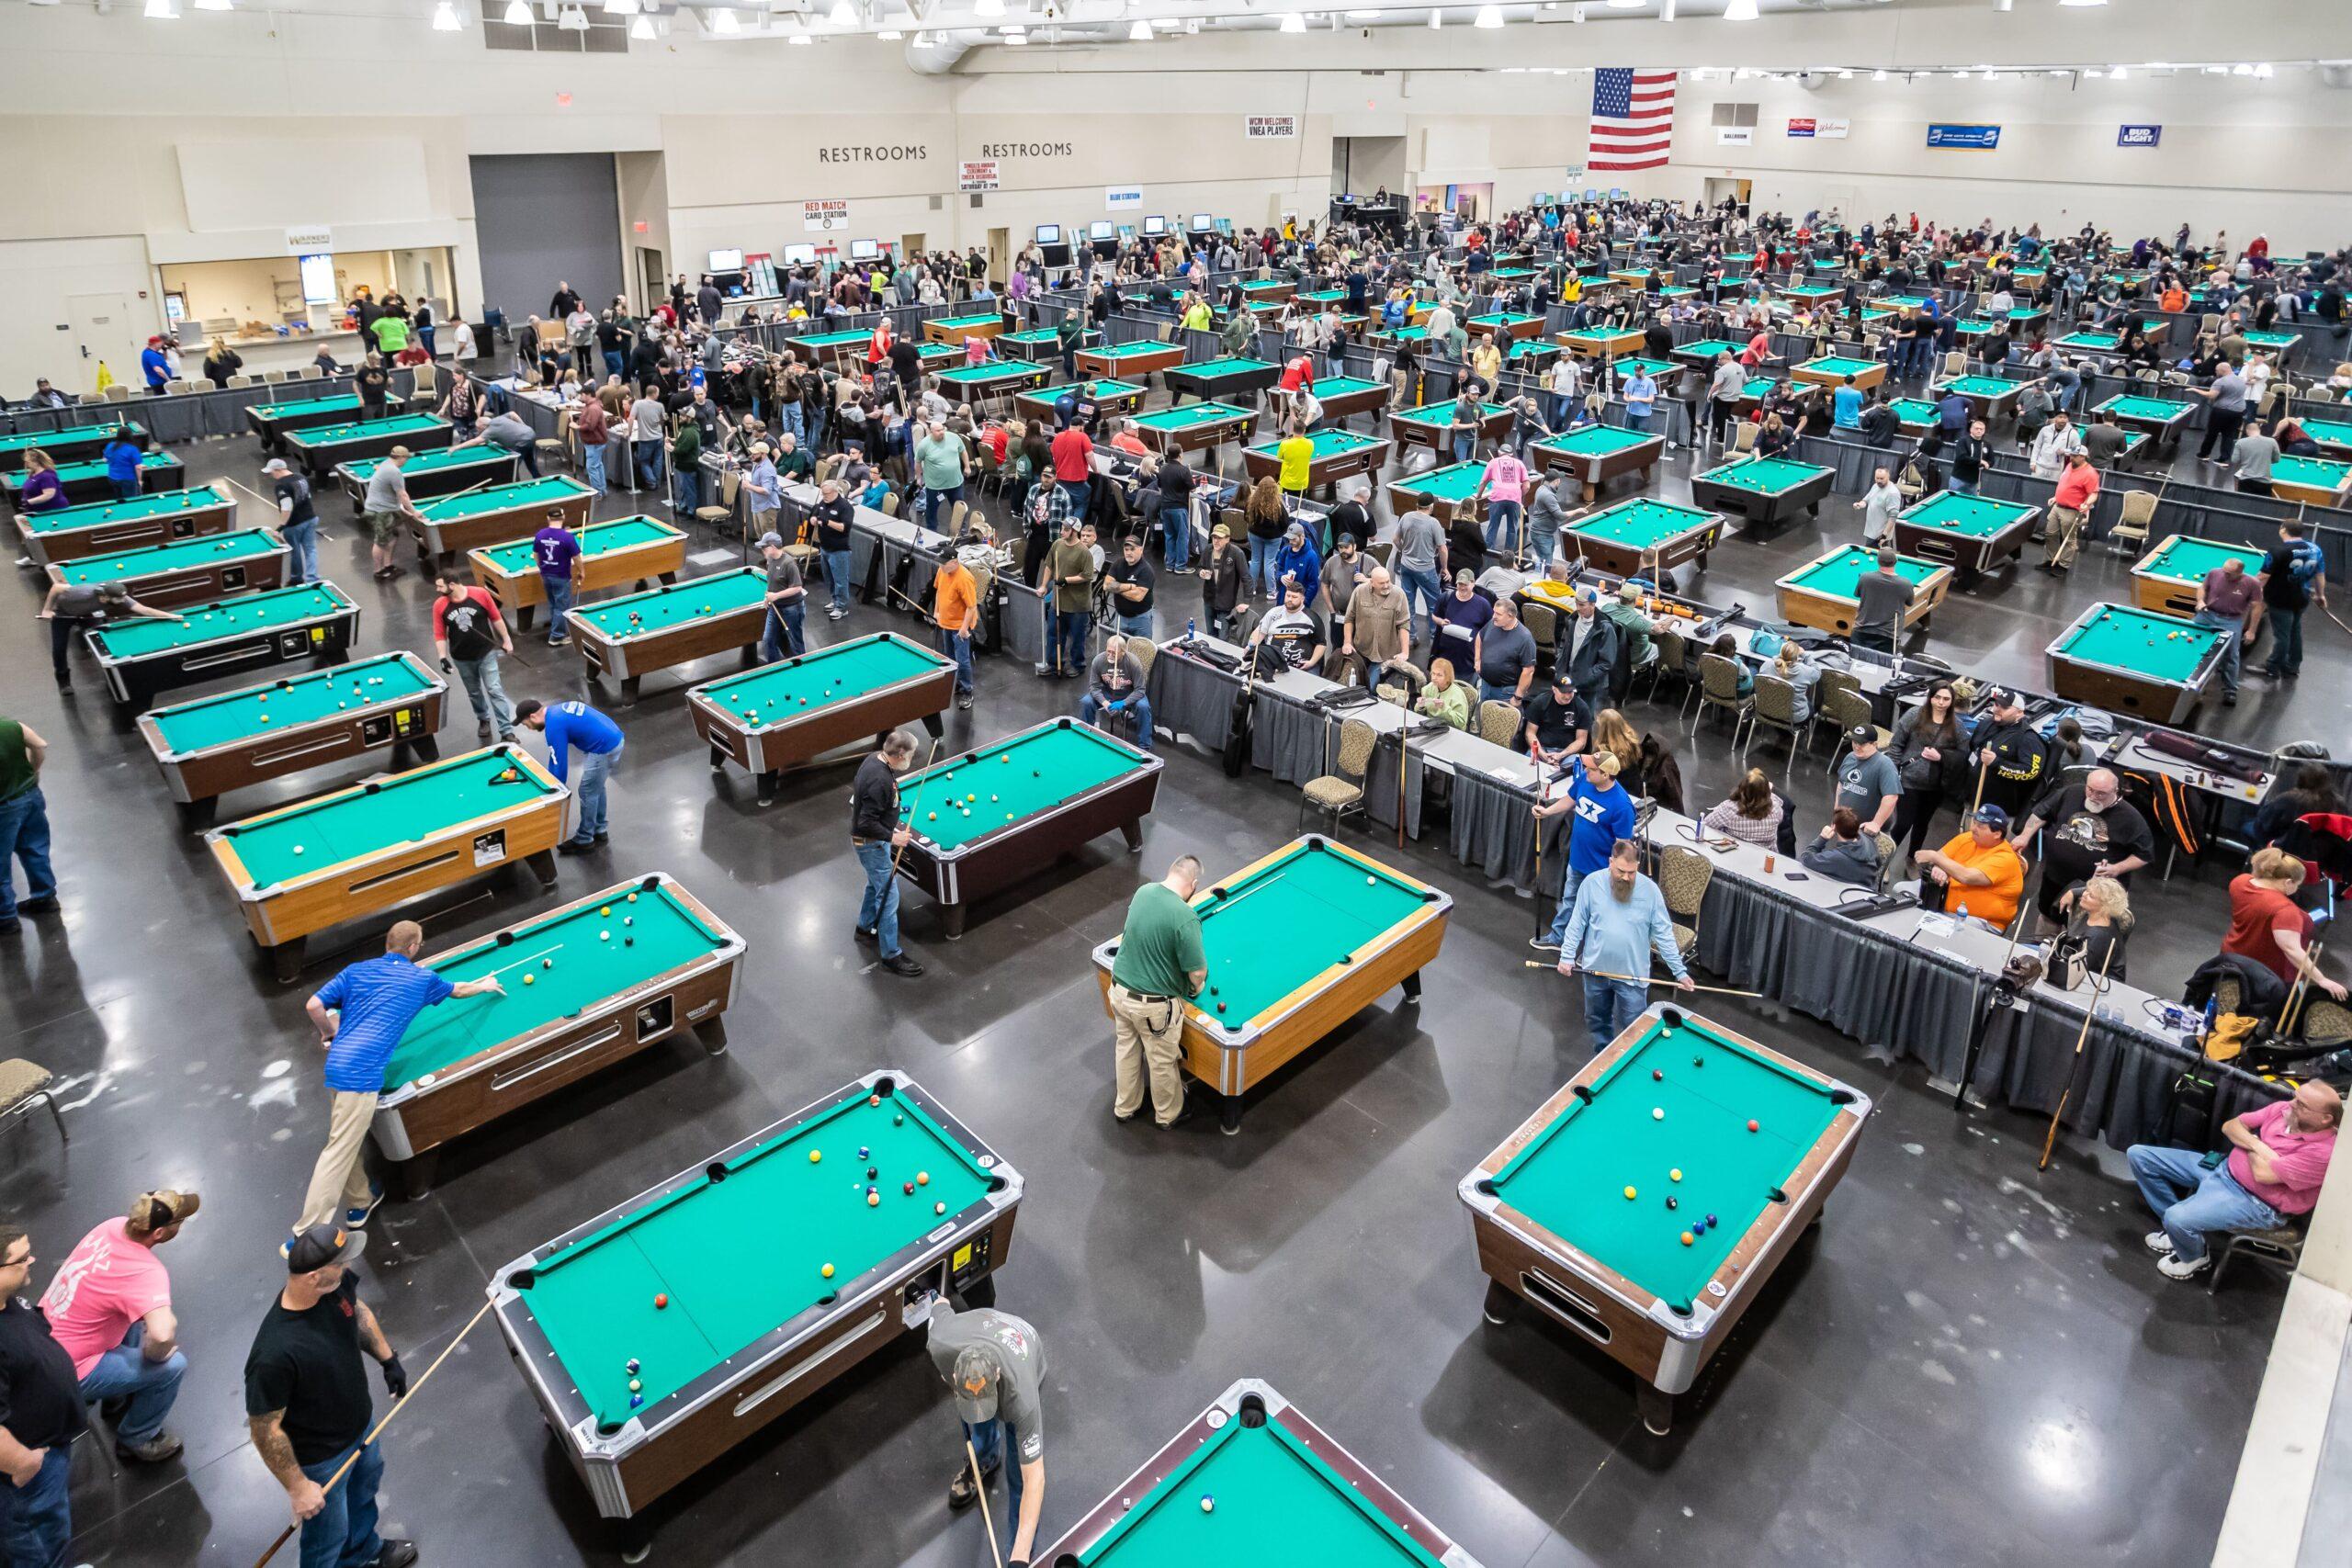 PA State 8Ball Tournament takes over Convention Center this weekend